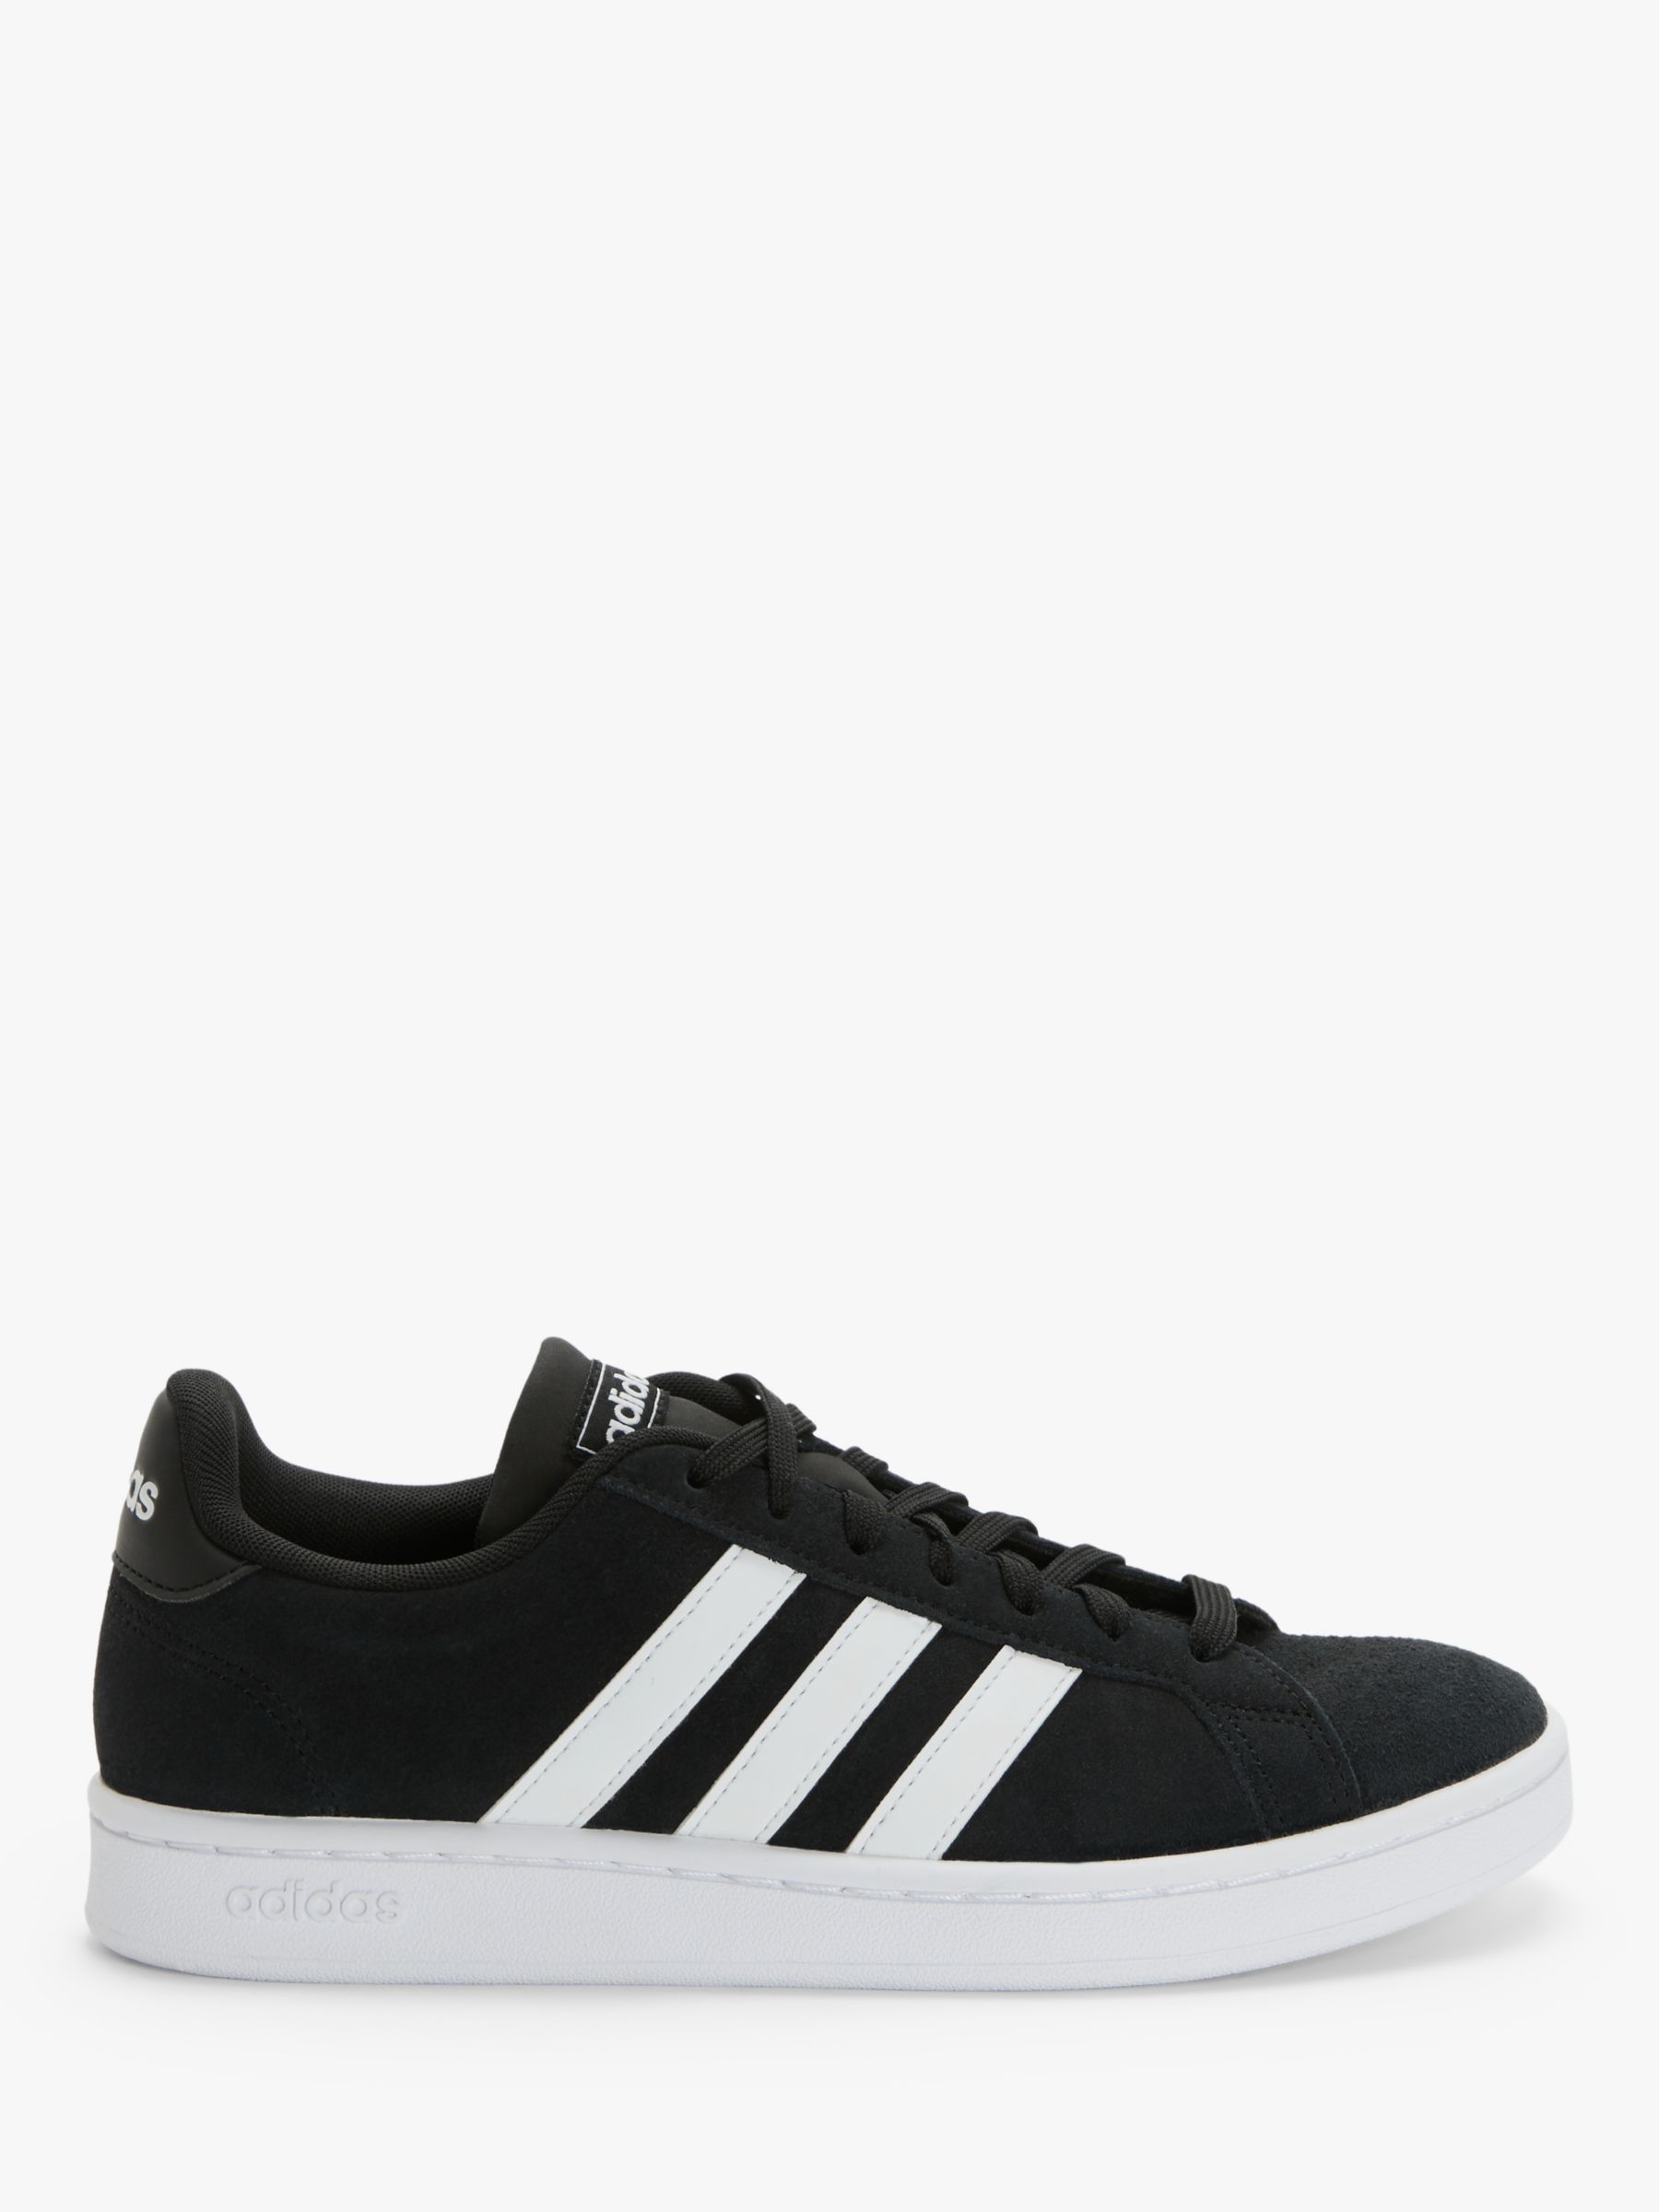 adidas Grand Court Men #39 s Suede Trainers Core Black/FTWR White at John